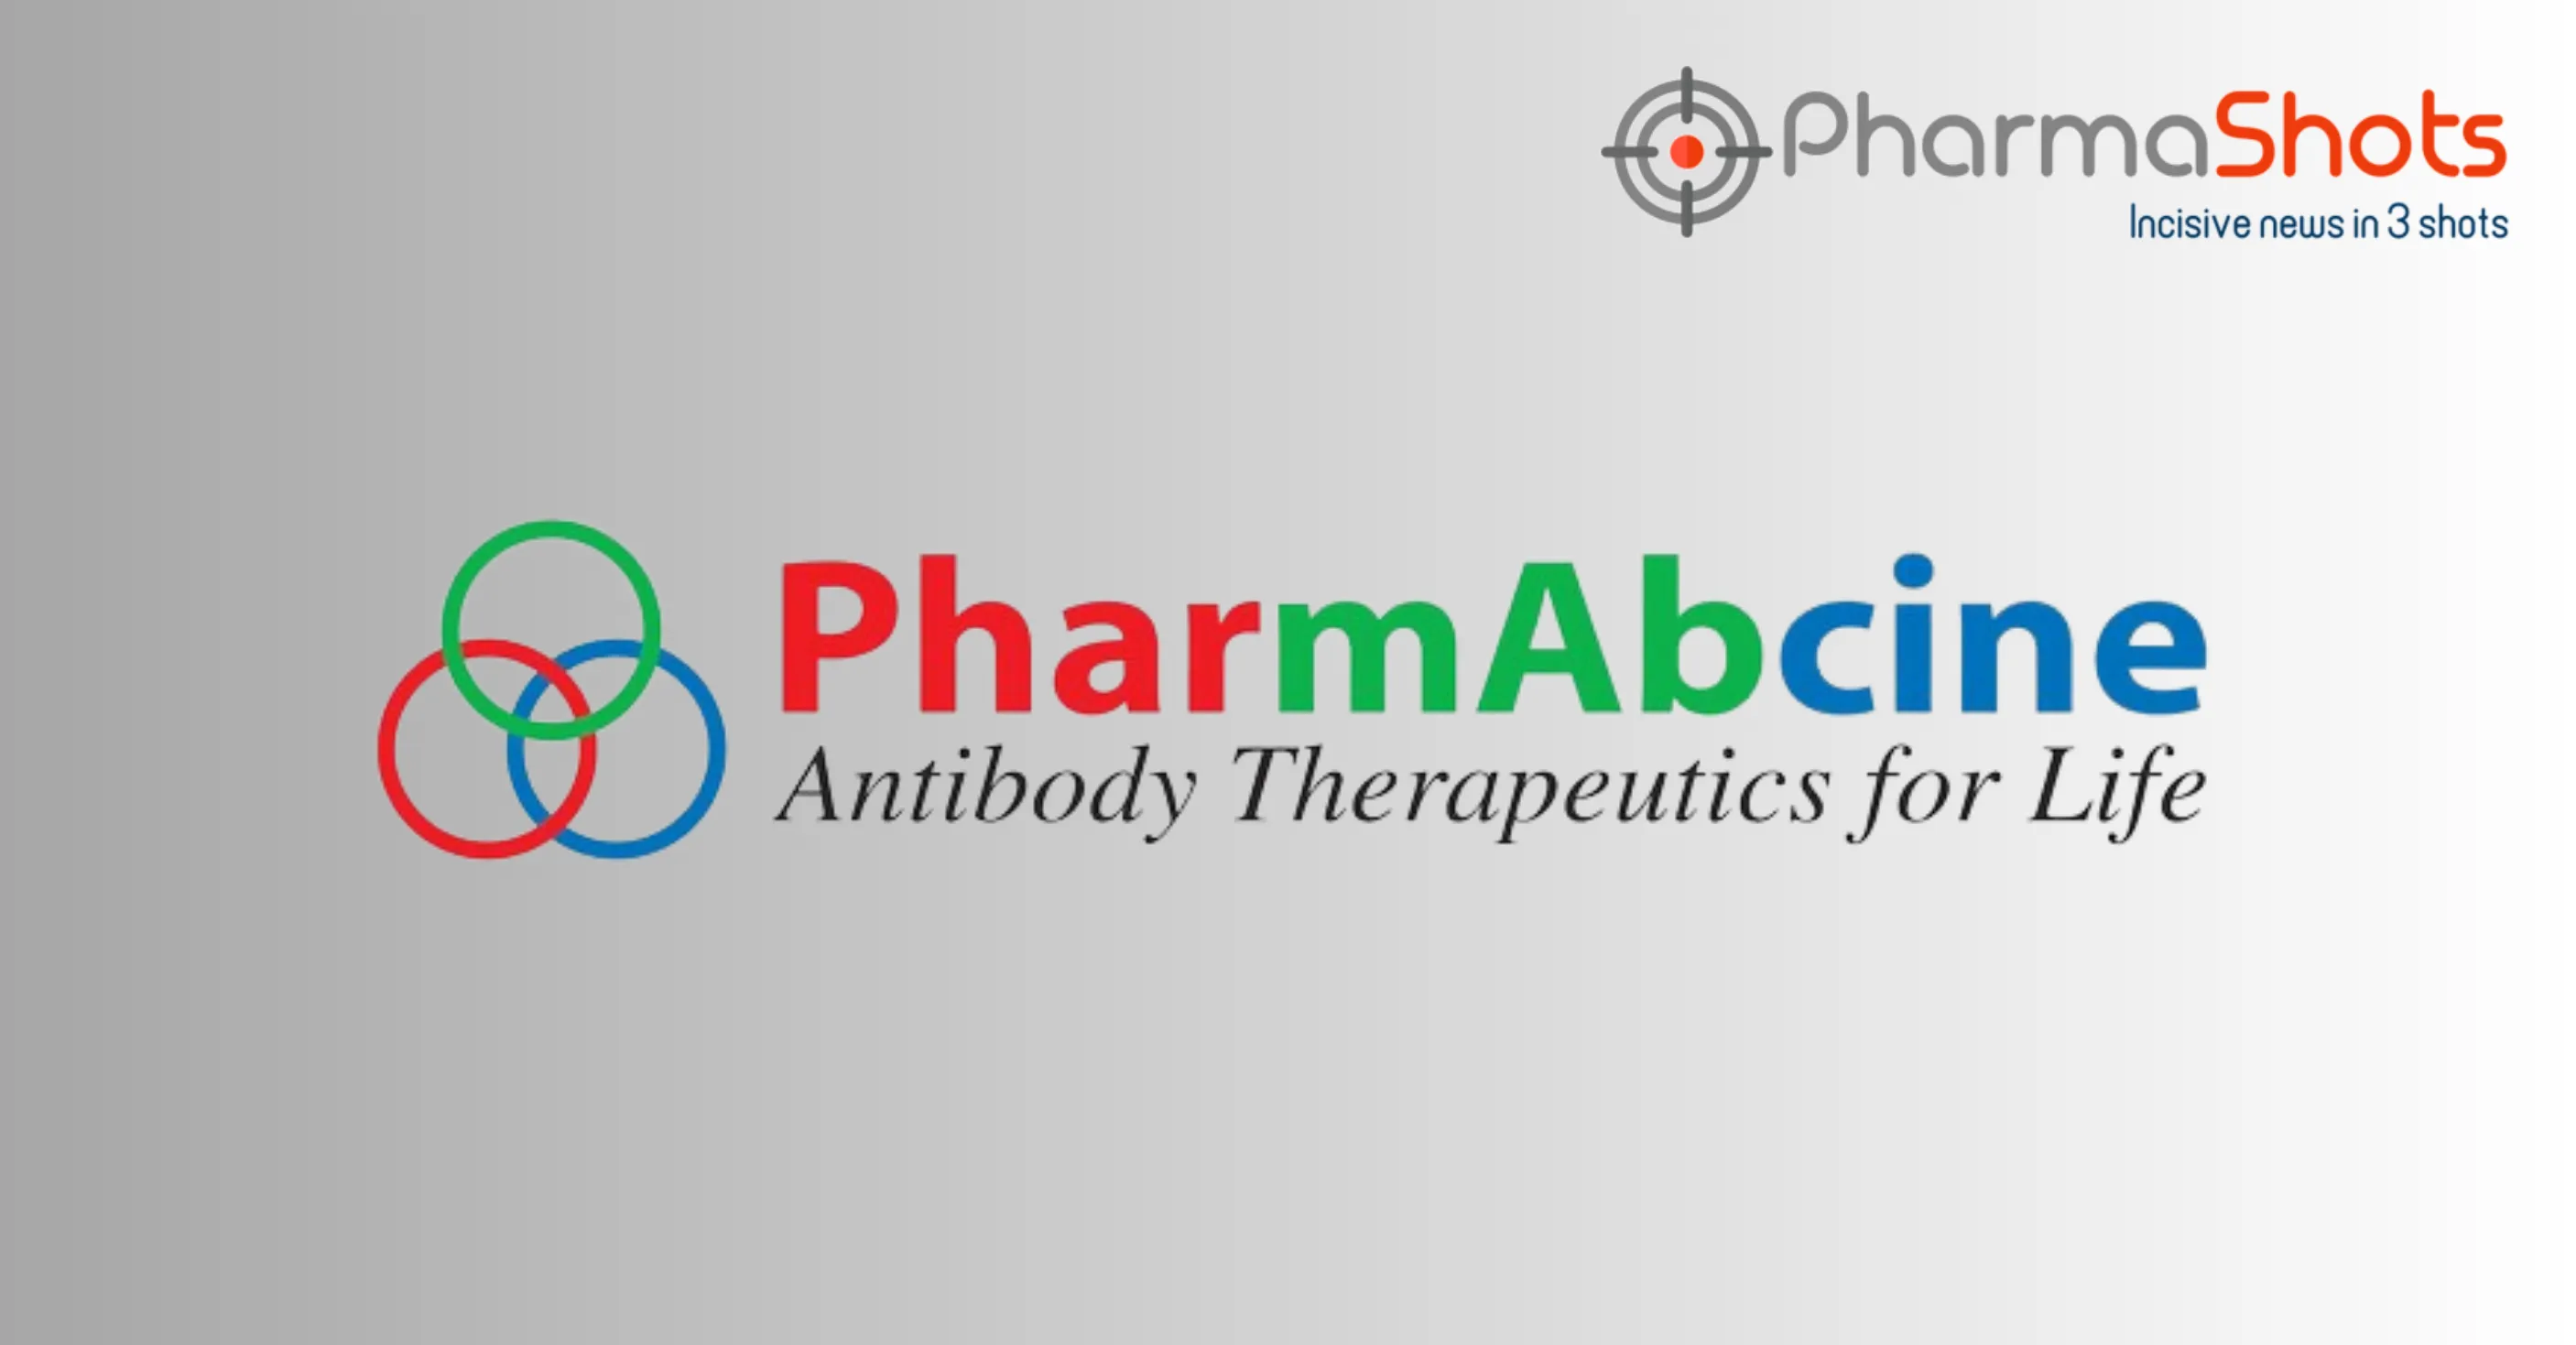 PharmAbcine Announced the Preclinical Data of PMC-403 for Idiopathic Systemic Capillary Leak Syndrome (ISCLS, a.k.a. Clarkson Disease)